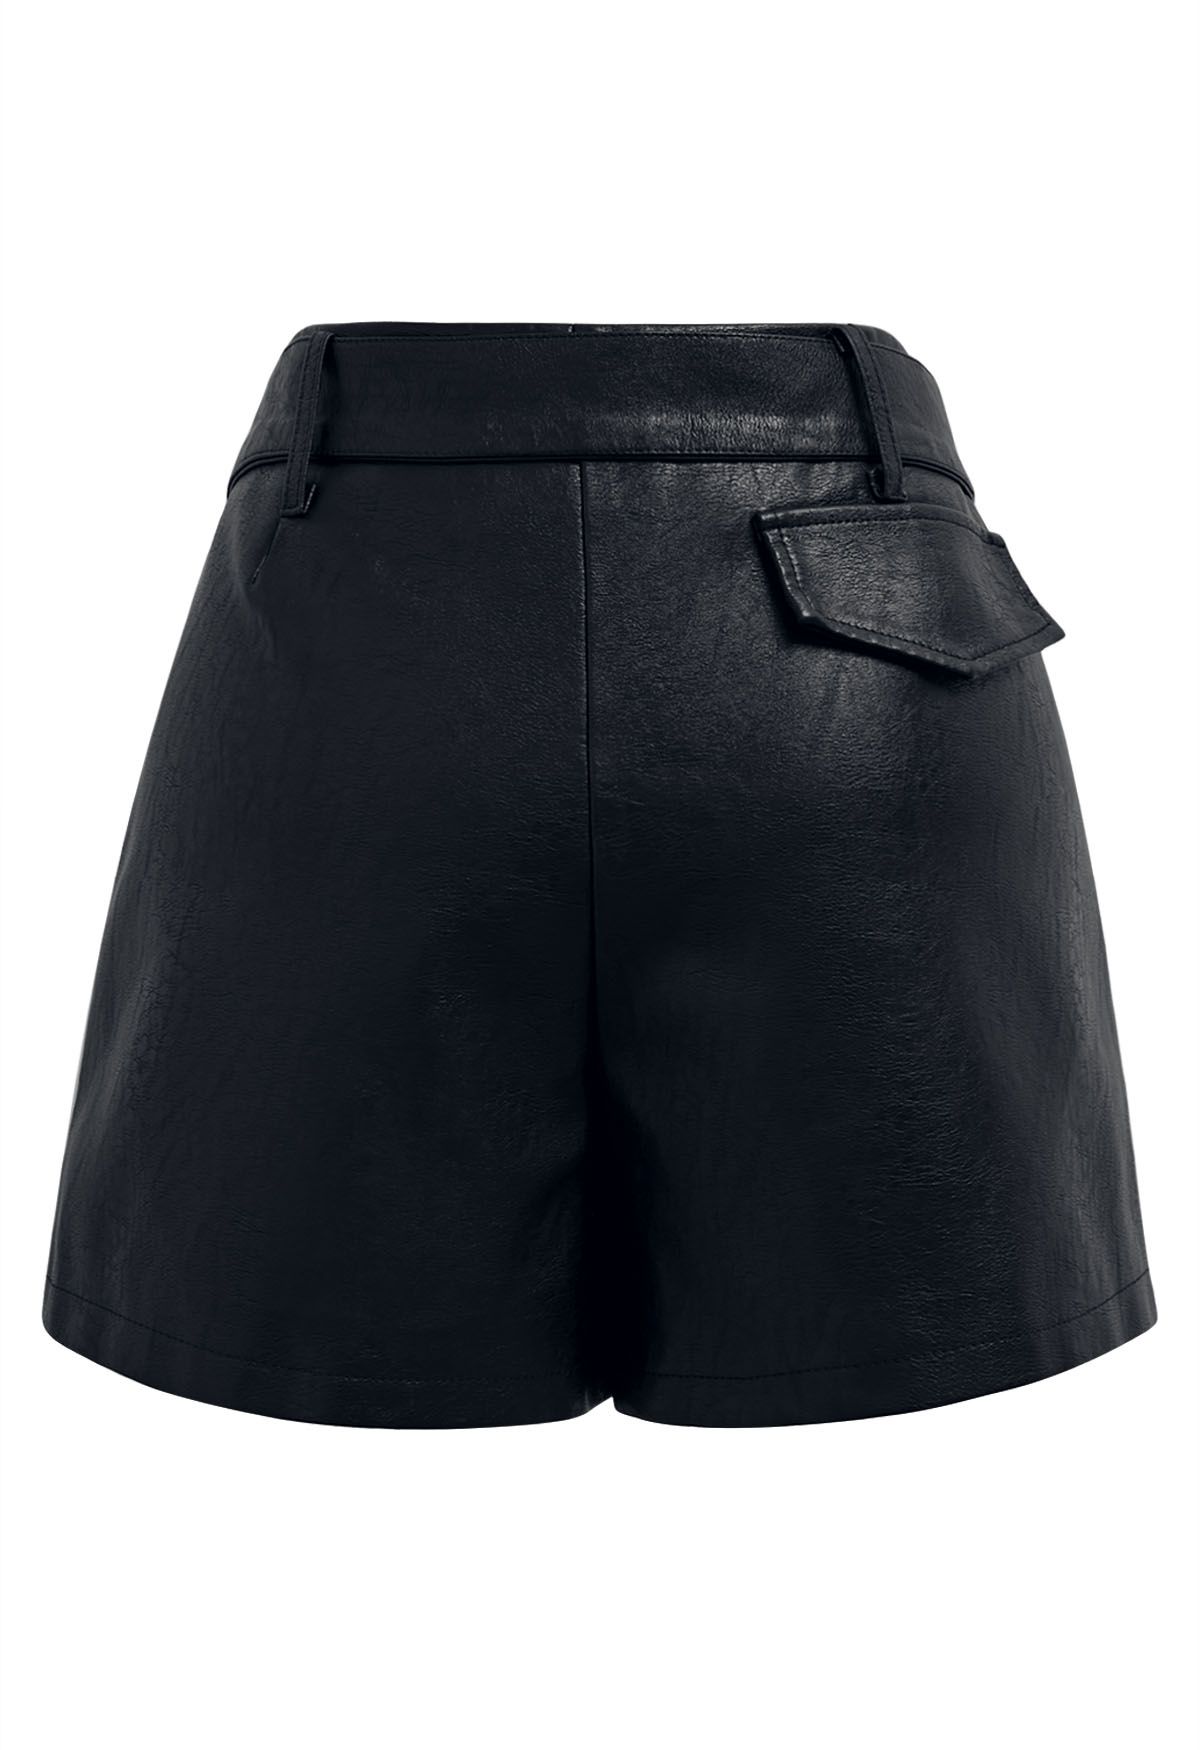 Urban Edge Faux Leather Belted Shorts in Black